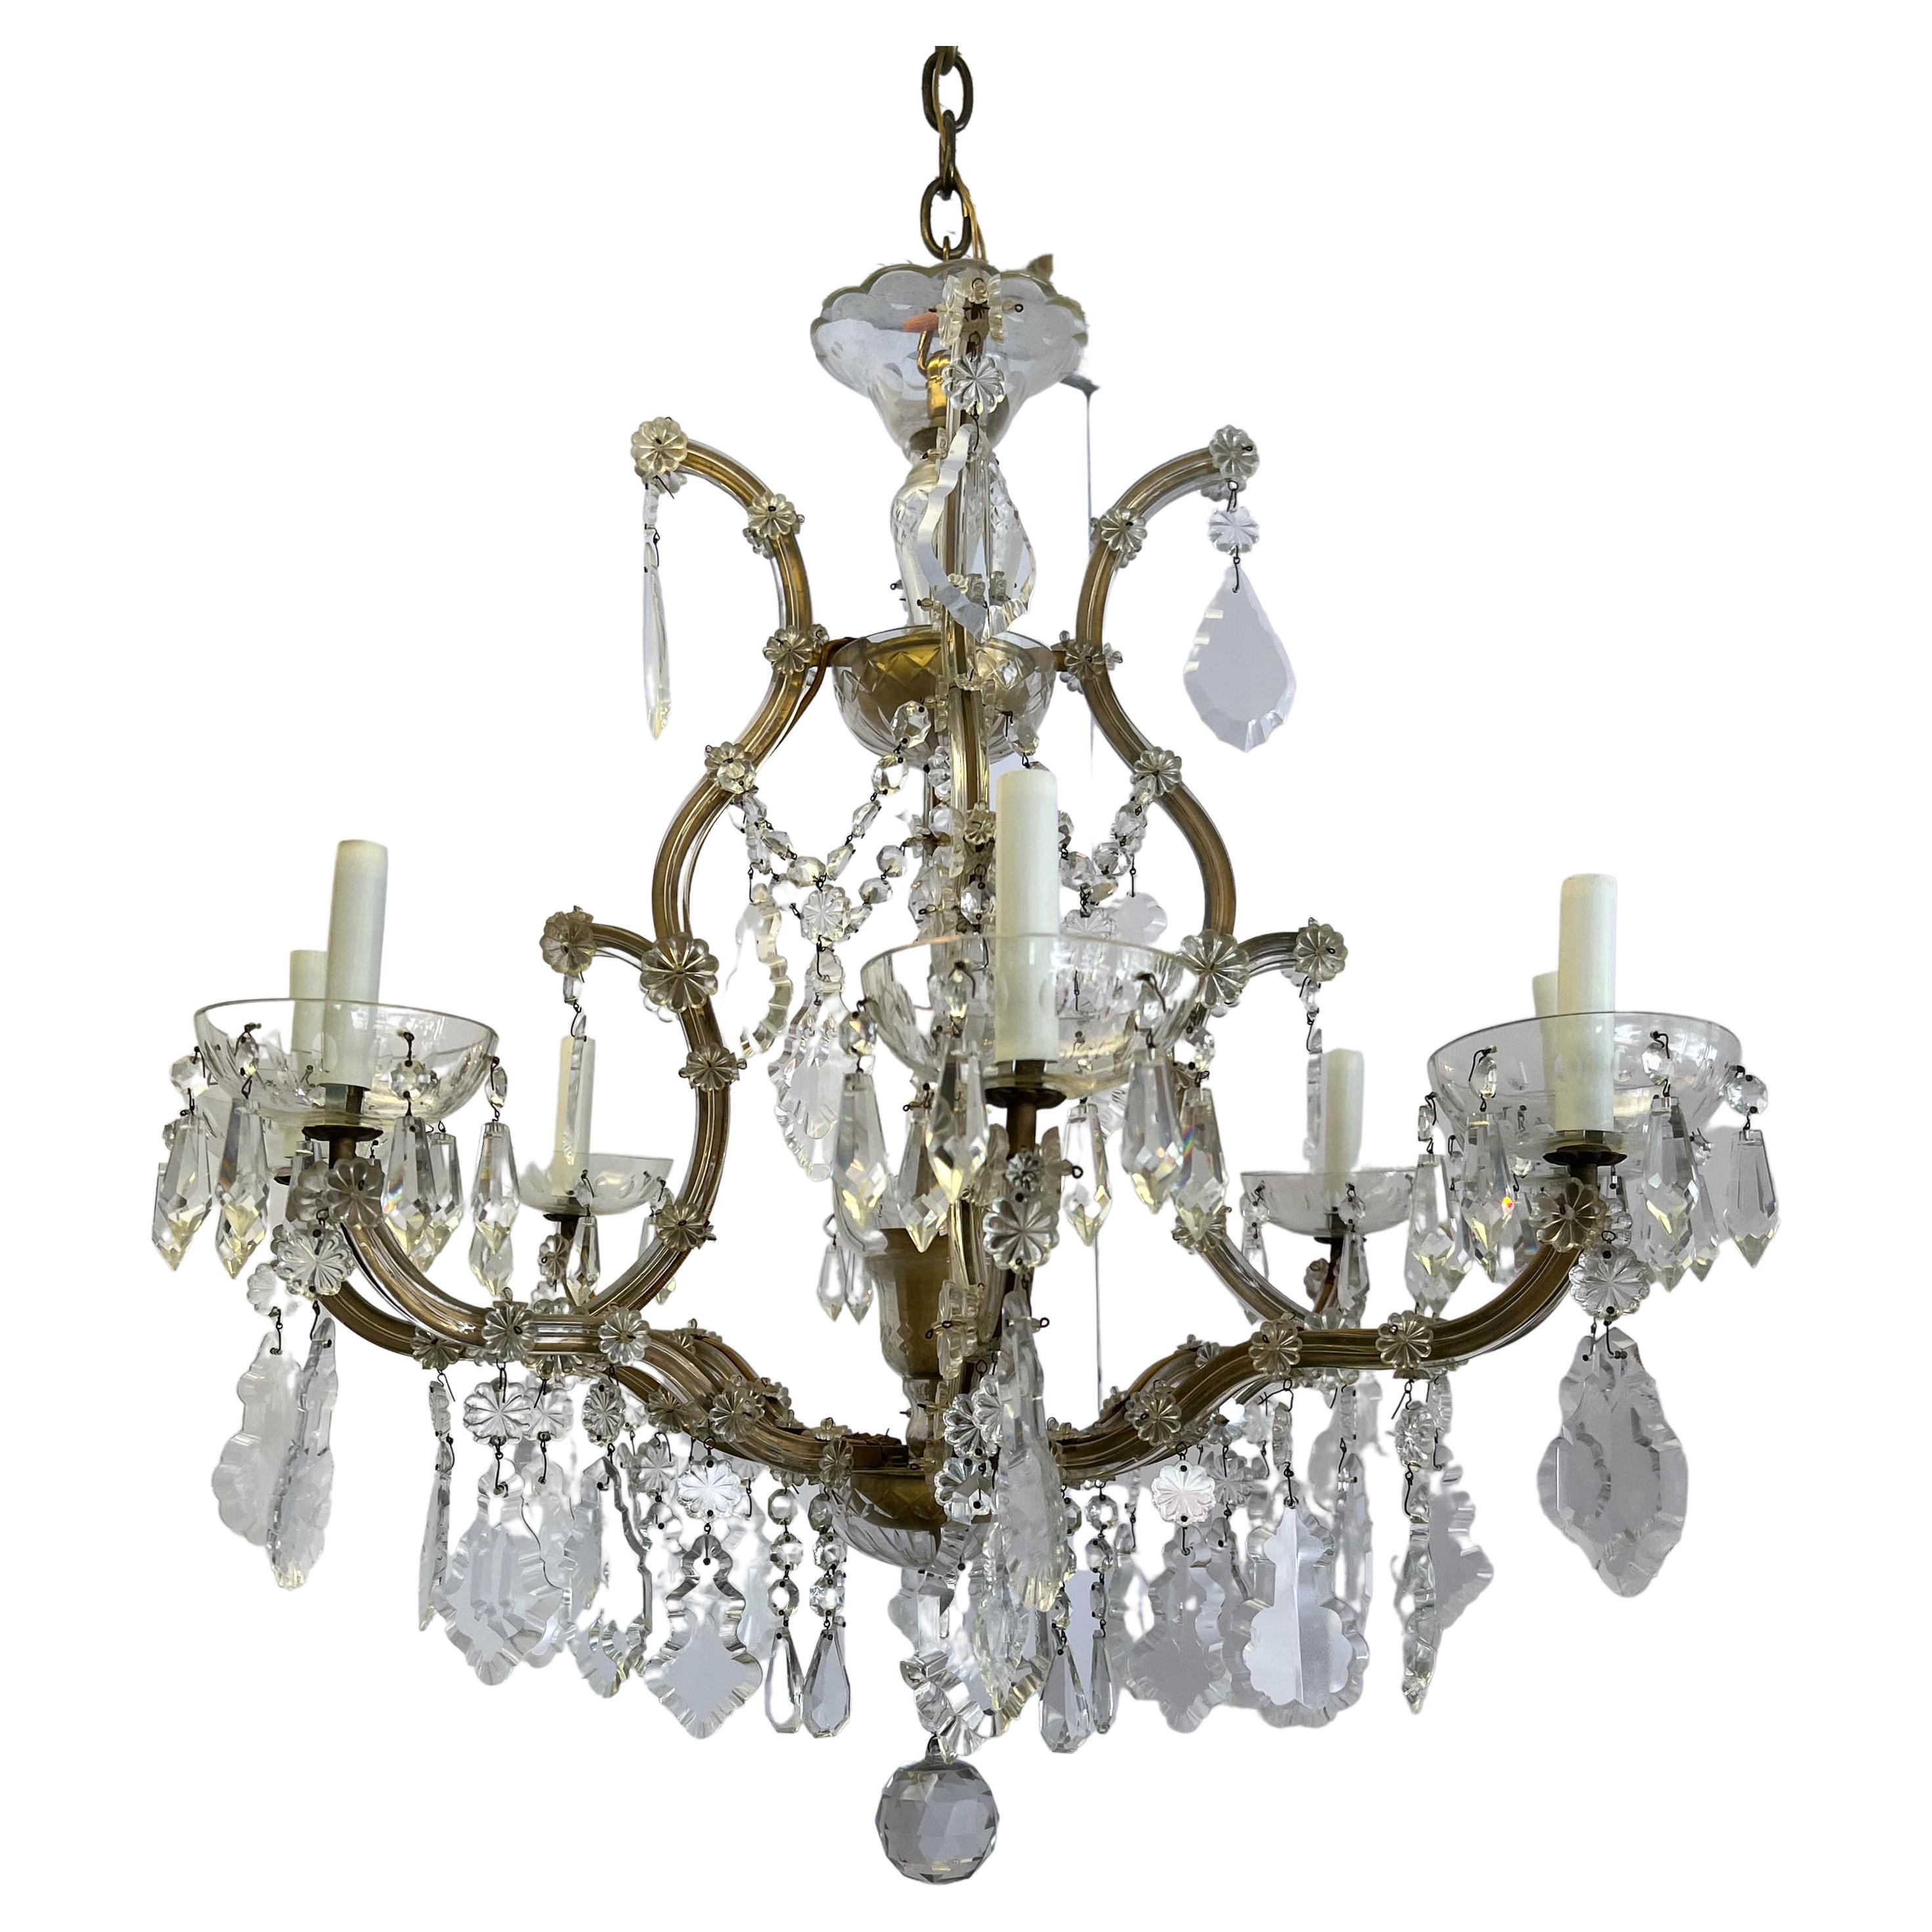 Early 20th Century Maria Theresa 8 Arm Crystal Chandelier